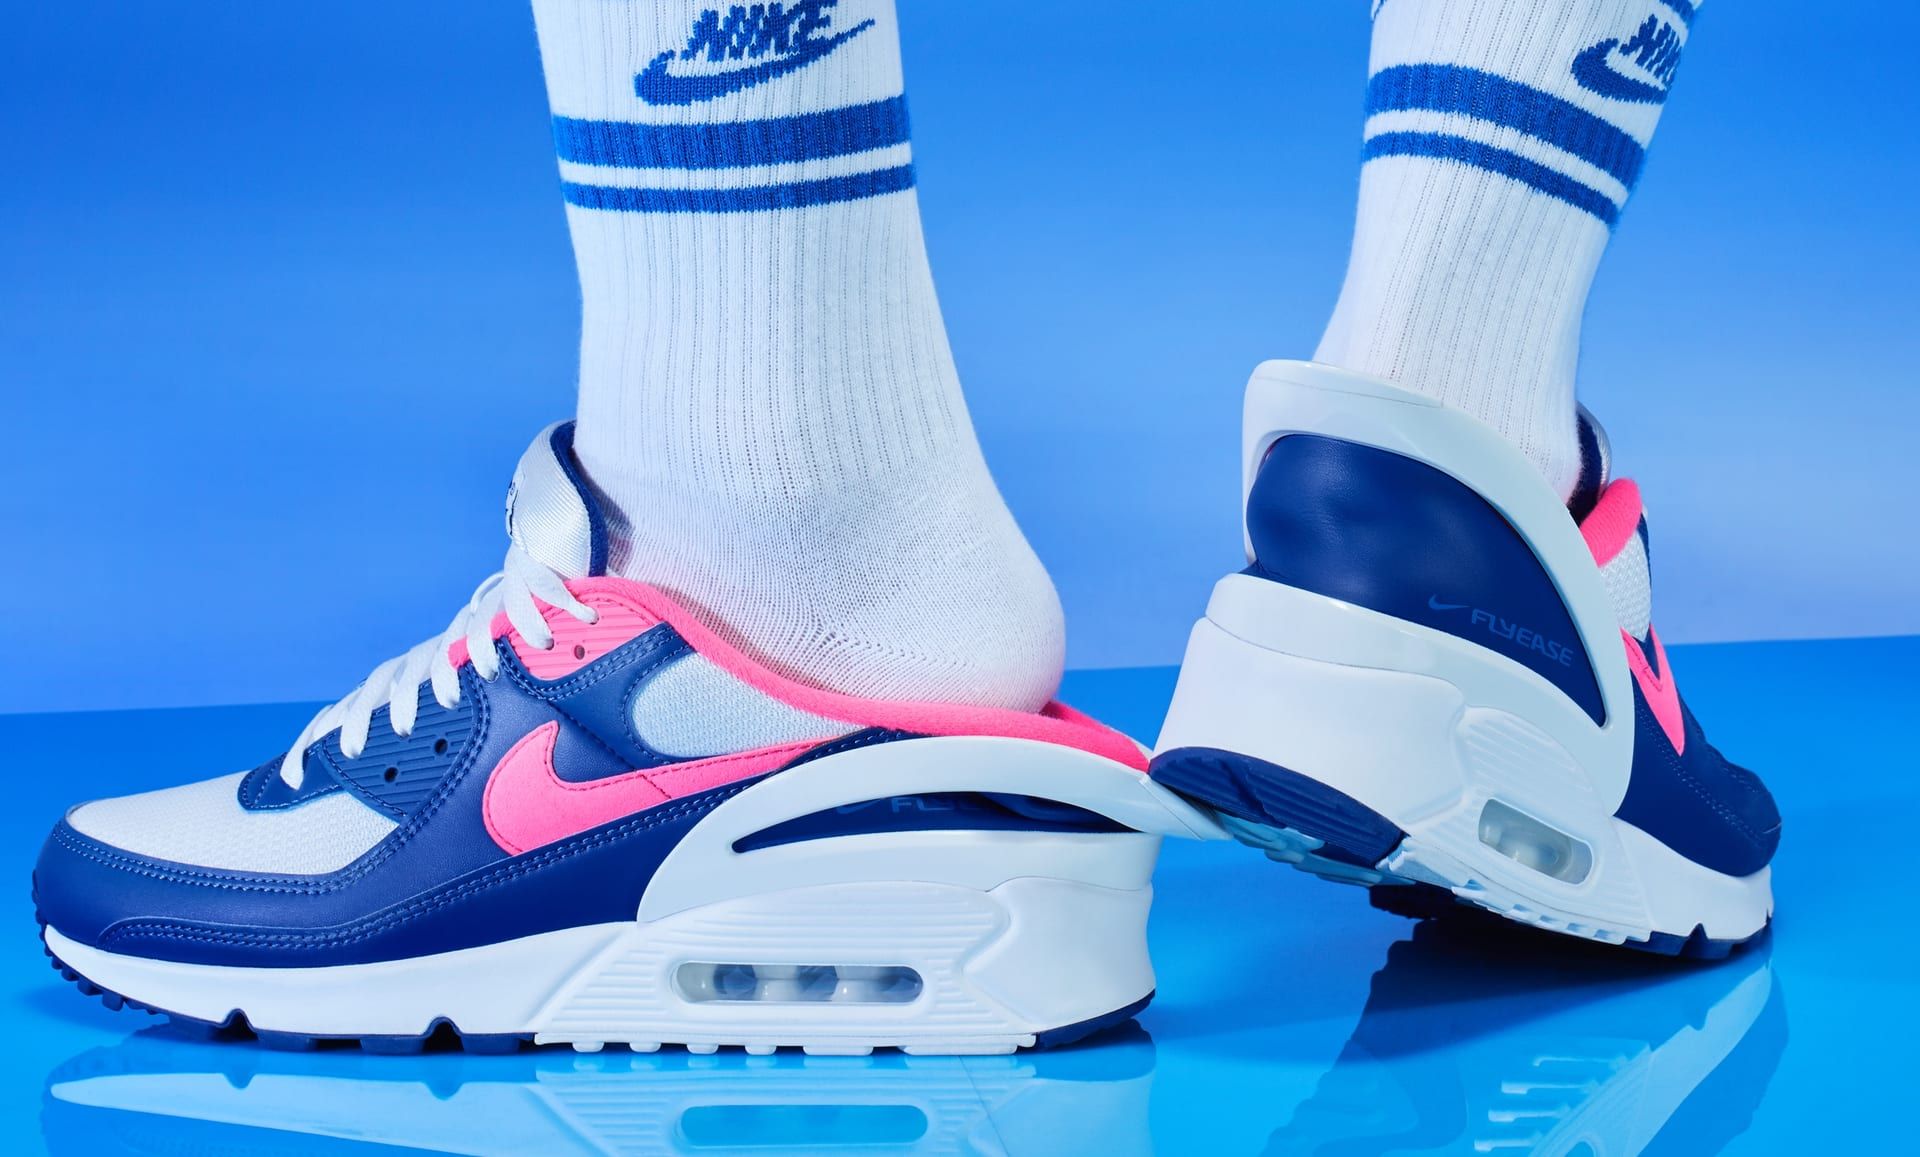 Nike Air Max 90 FlyEase Sneakers Have a 